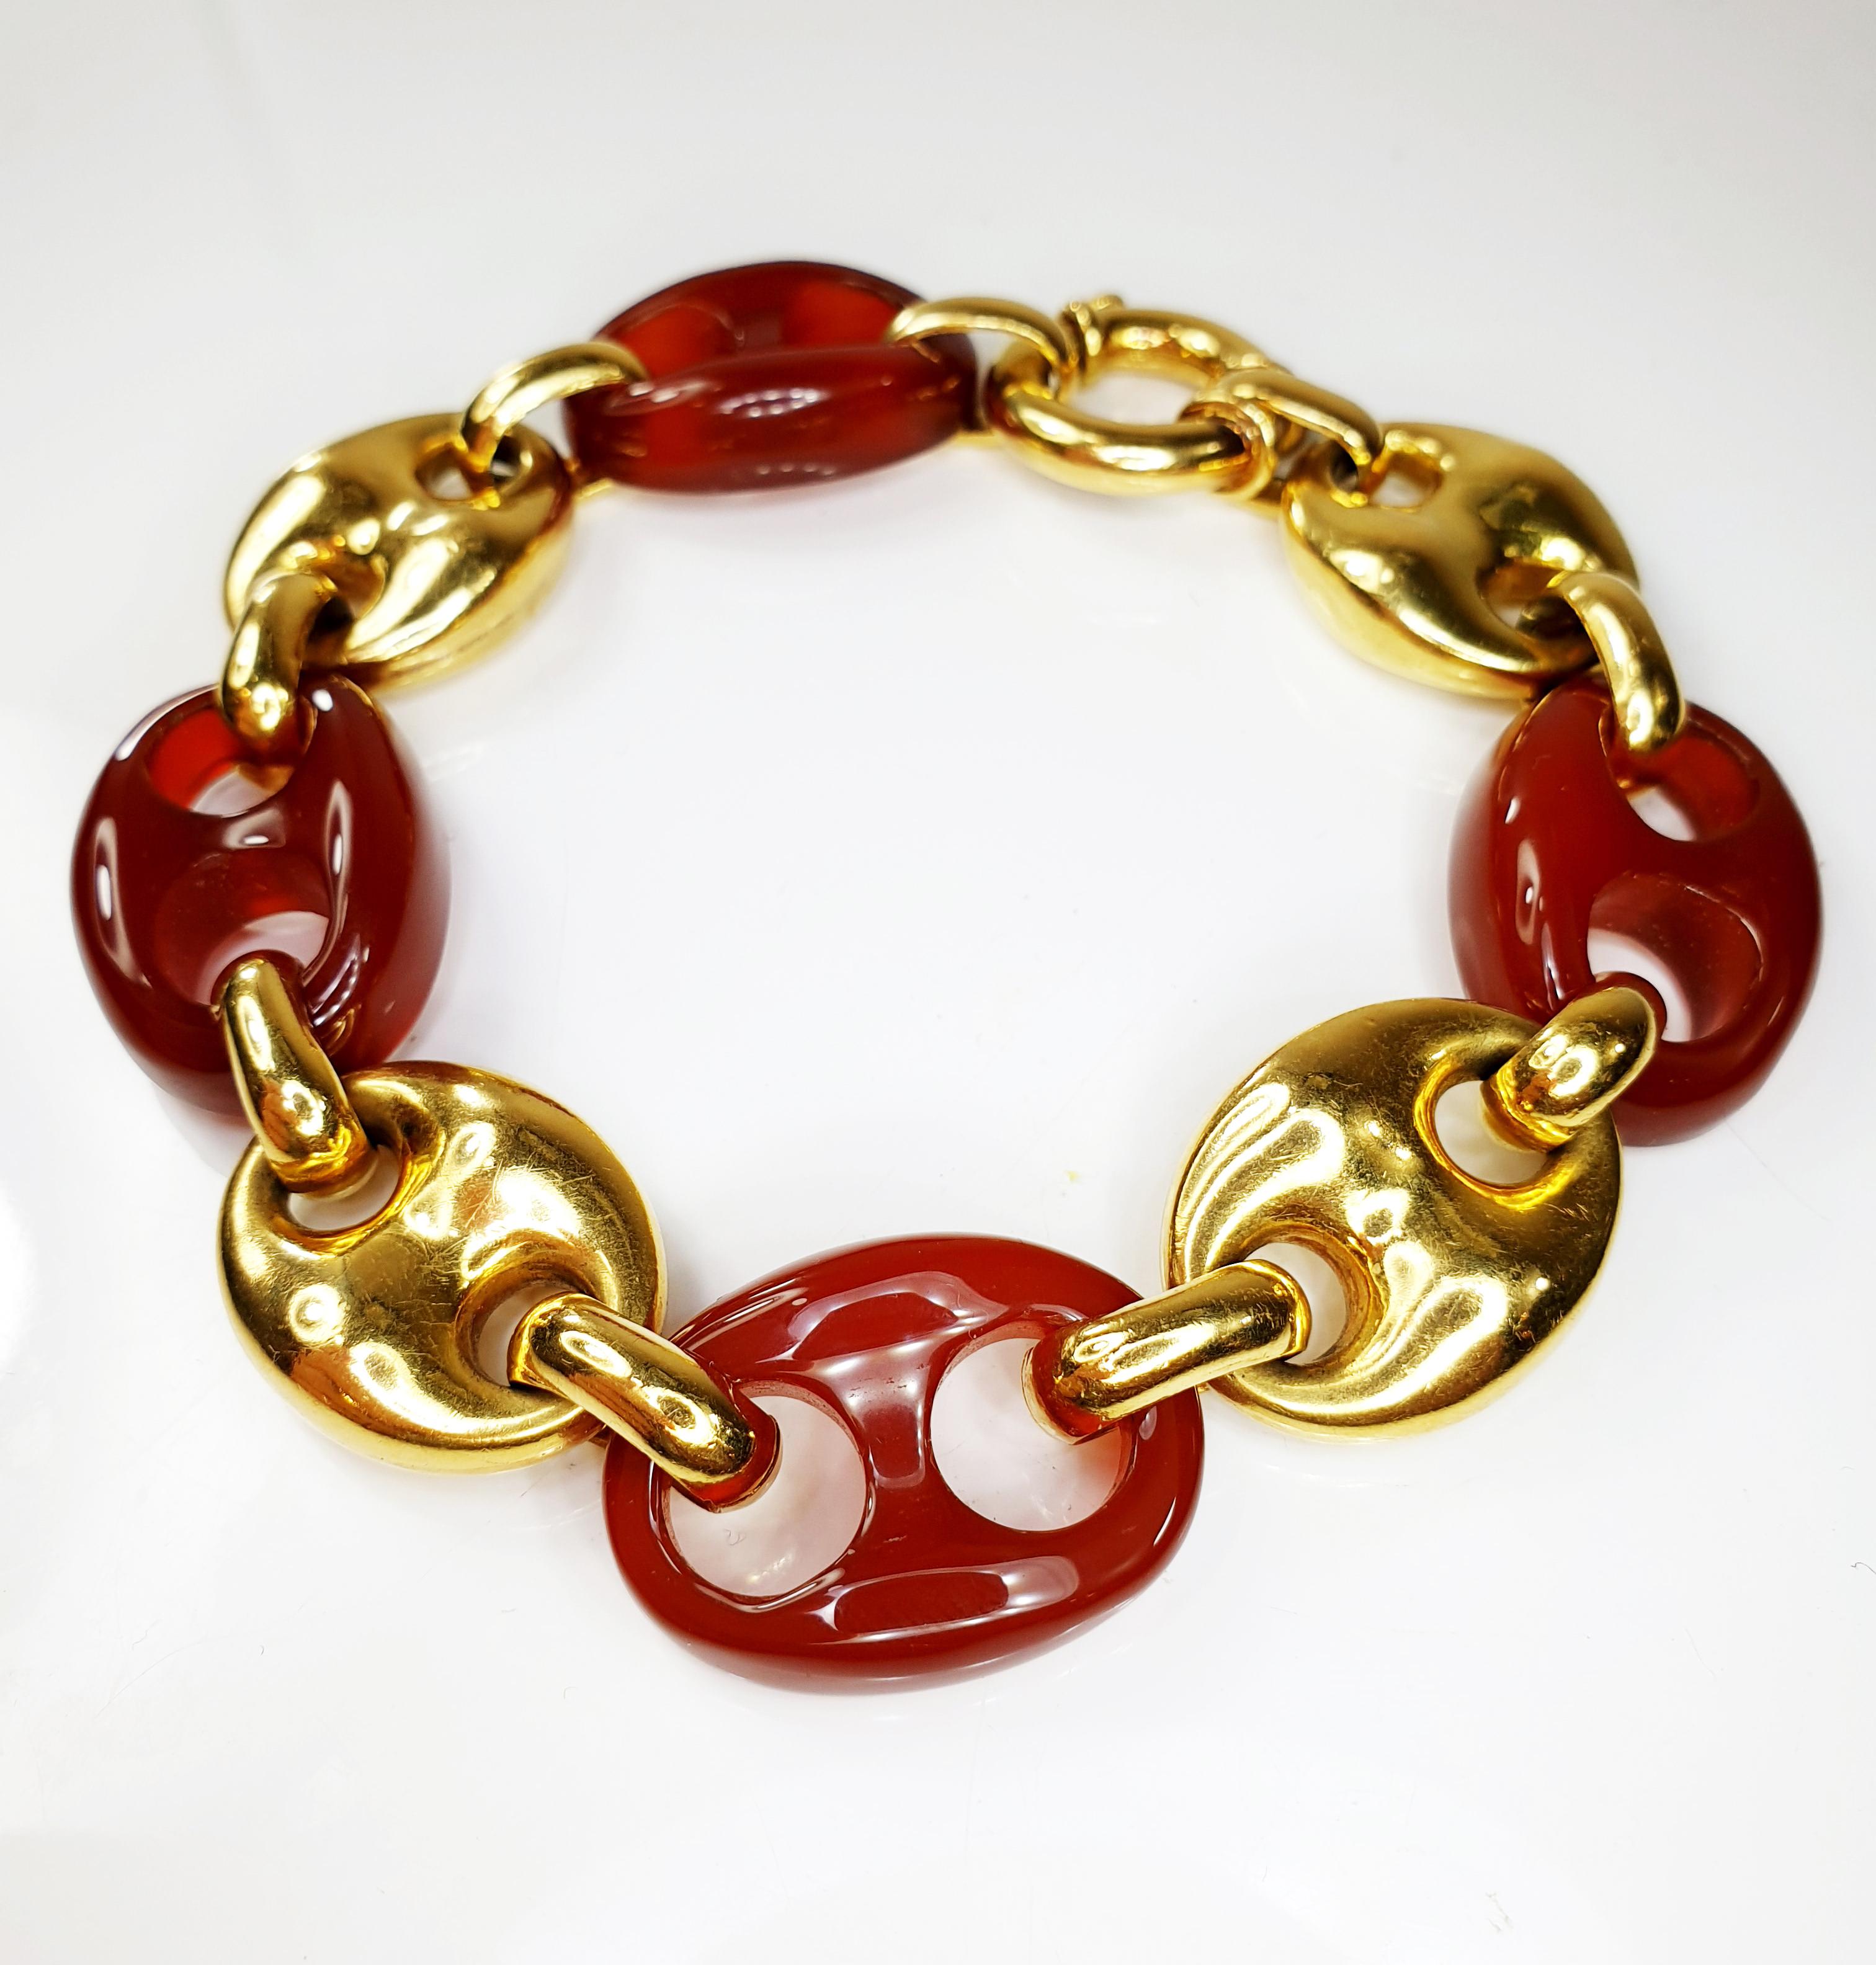 Contemporary Nautical Anchor Link Bracelet 18 Karat Solid Yellow Gold and Red Carnelian